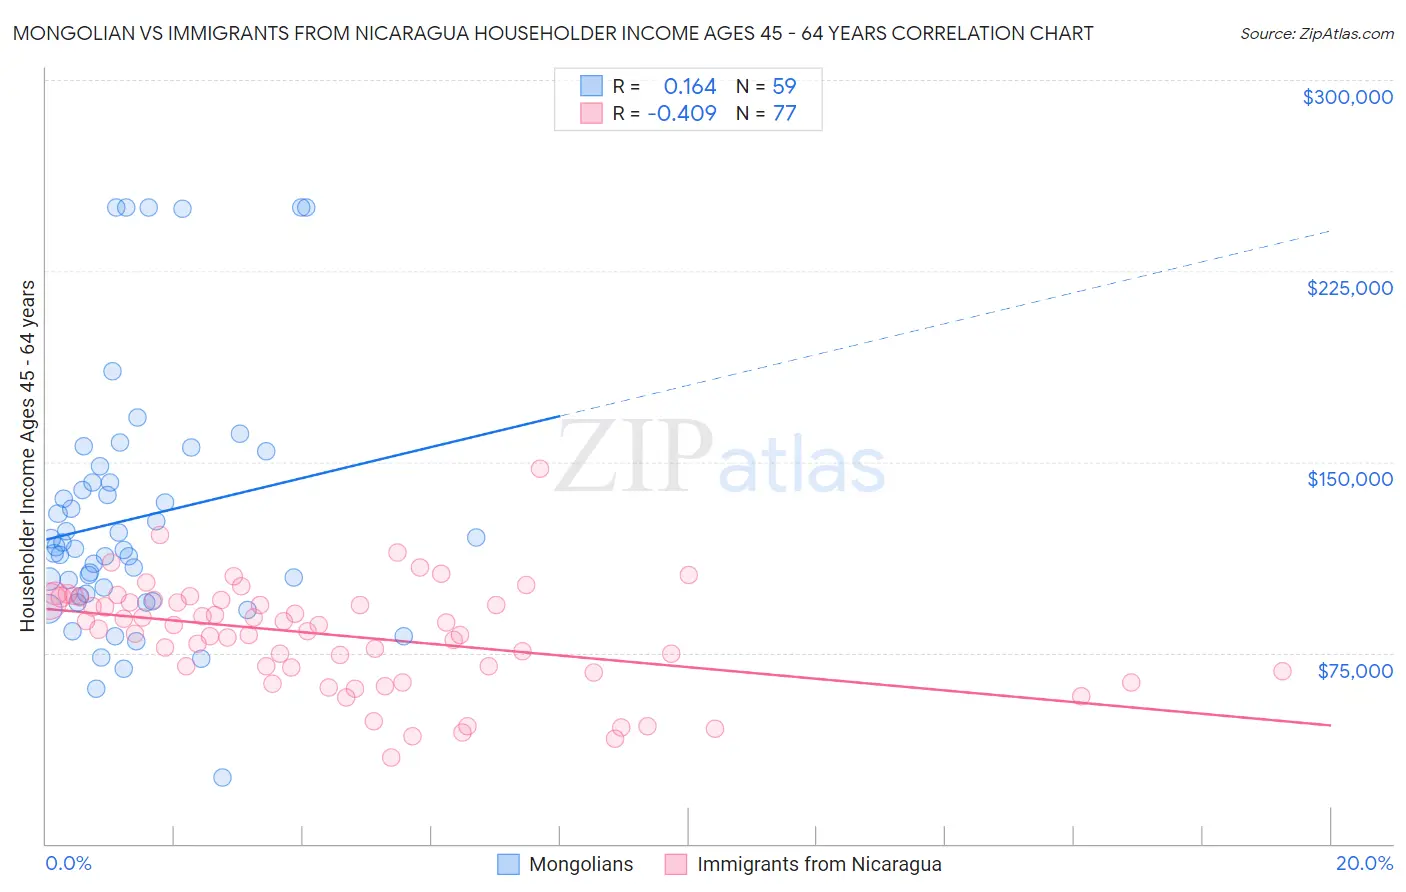 Mongolian vs Immigrants from Nicaragua Householder Income Ages 45 - 64 years